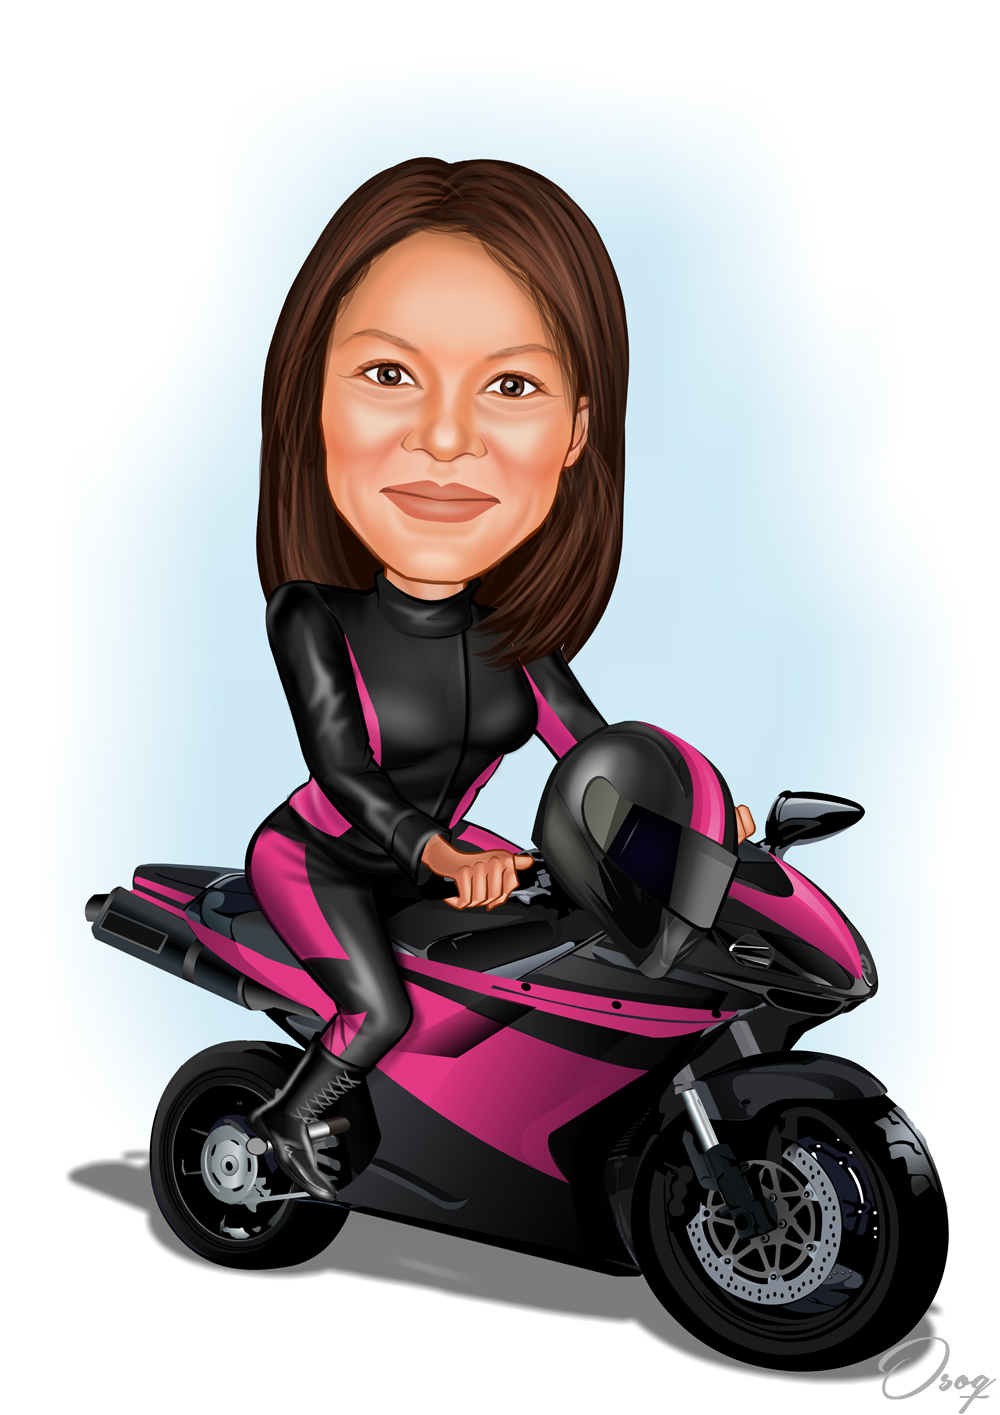 Female Motorcycle Caricatures